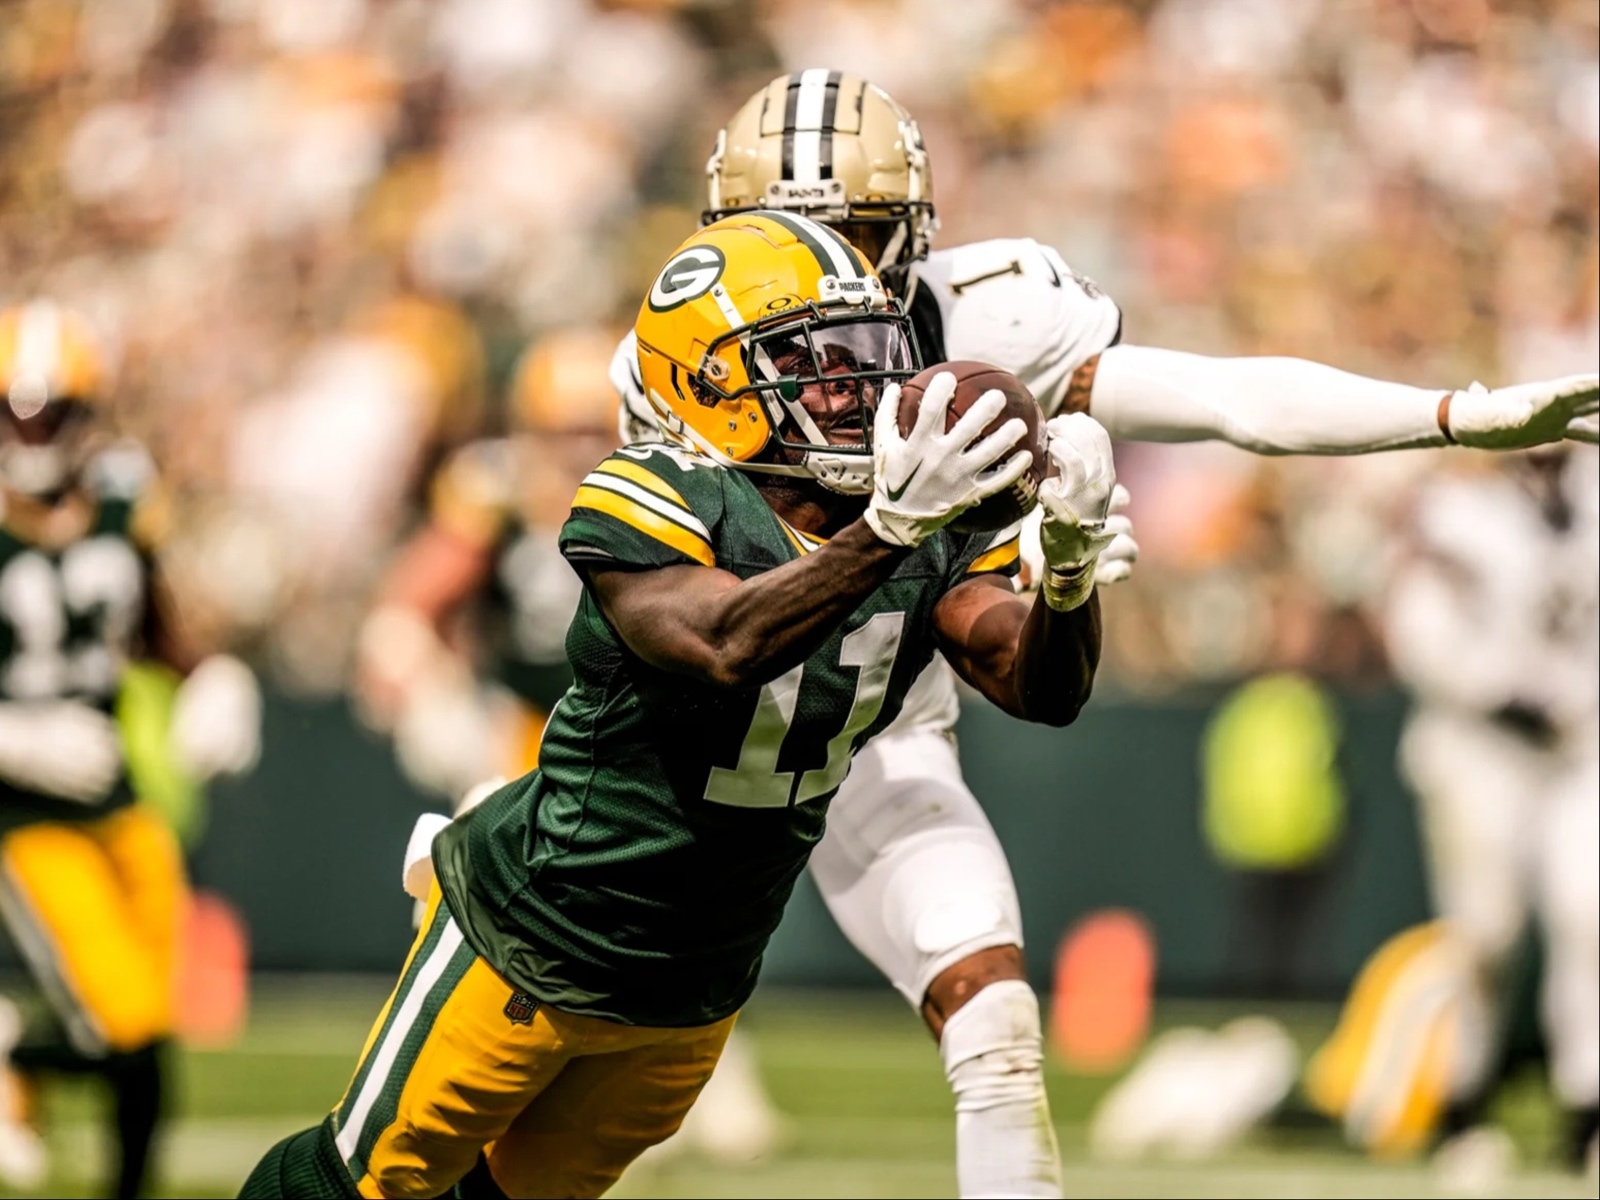 This was definitely it': Packers put together complete performance